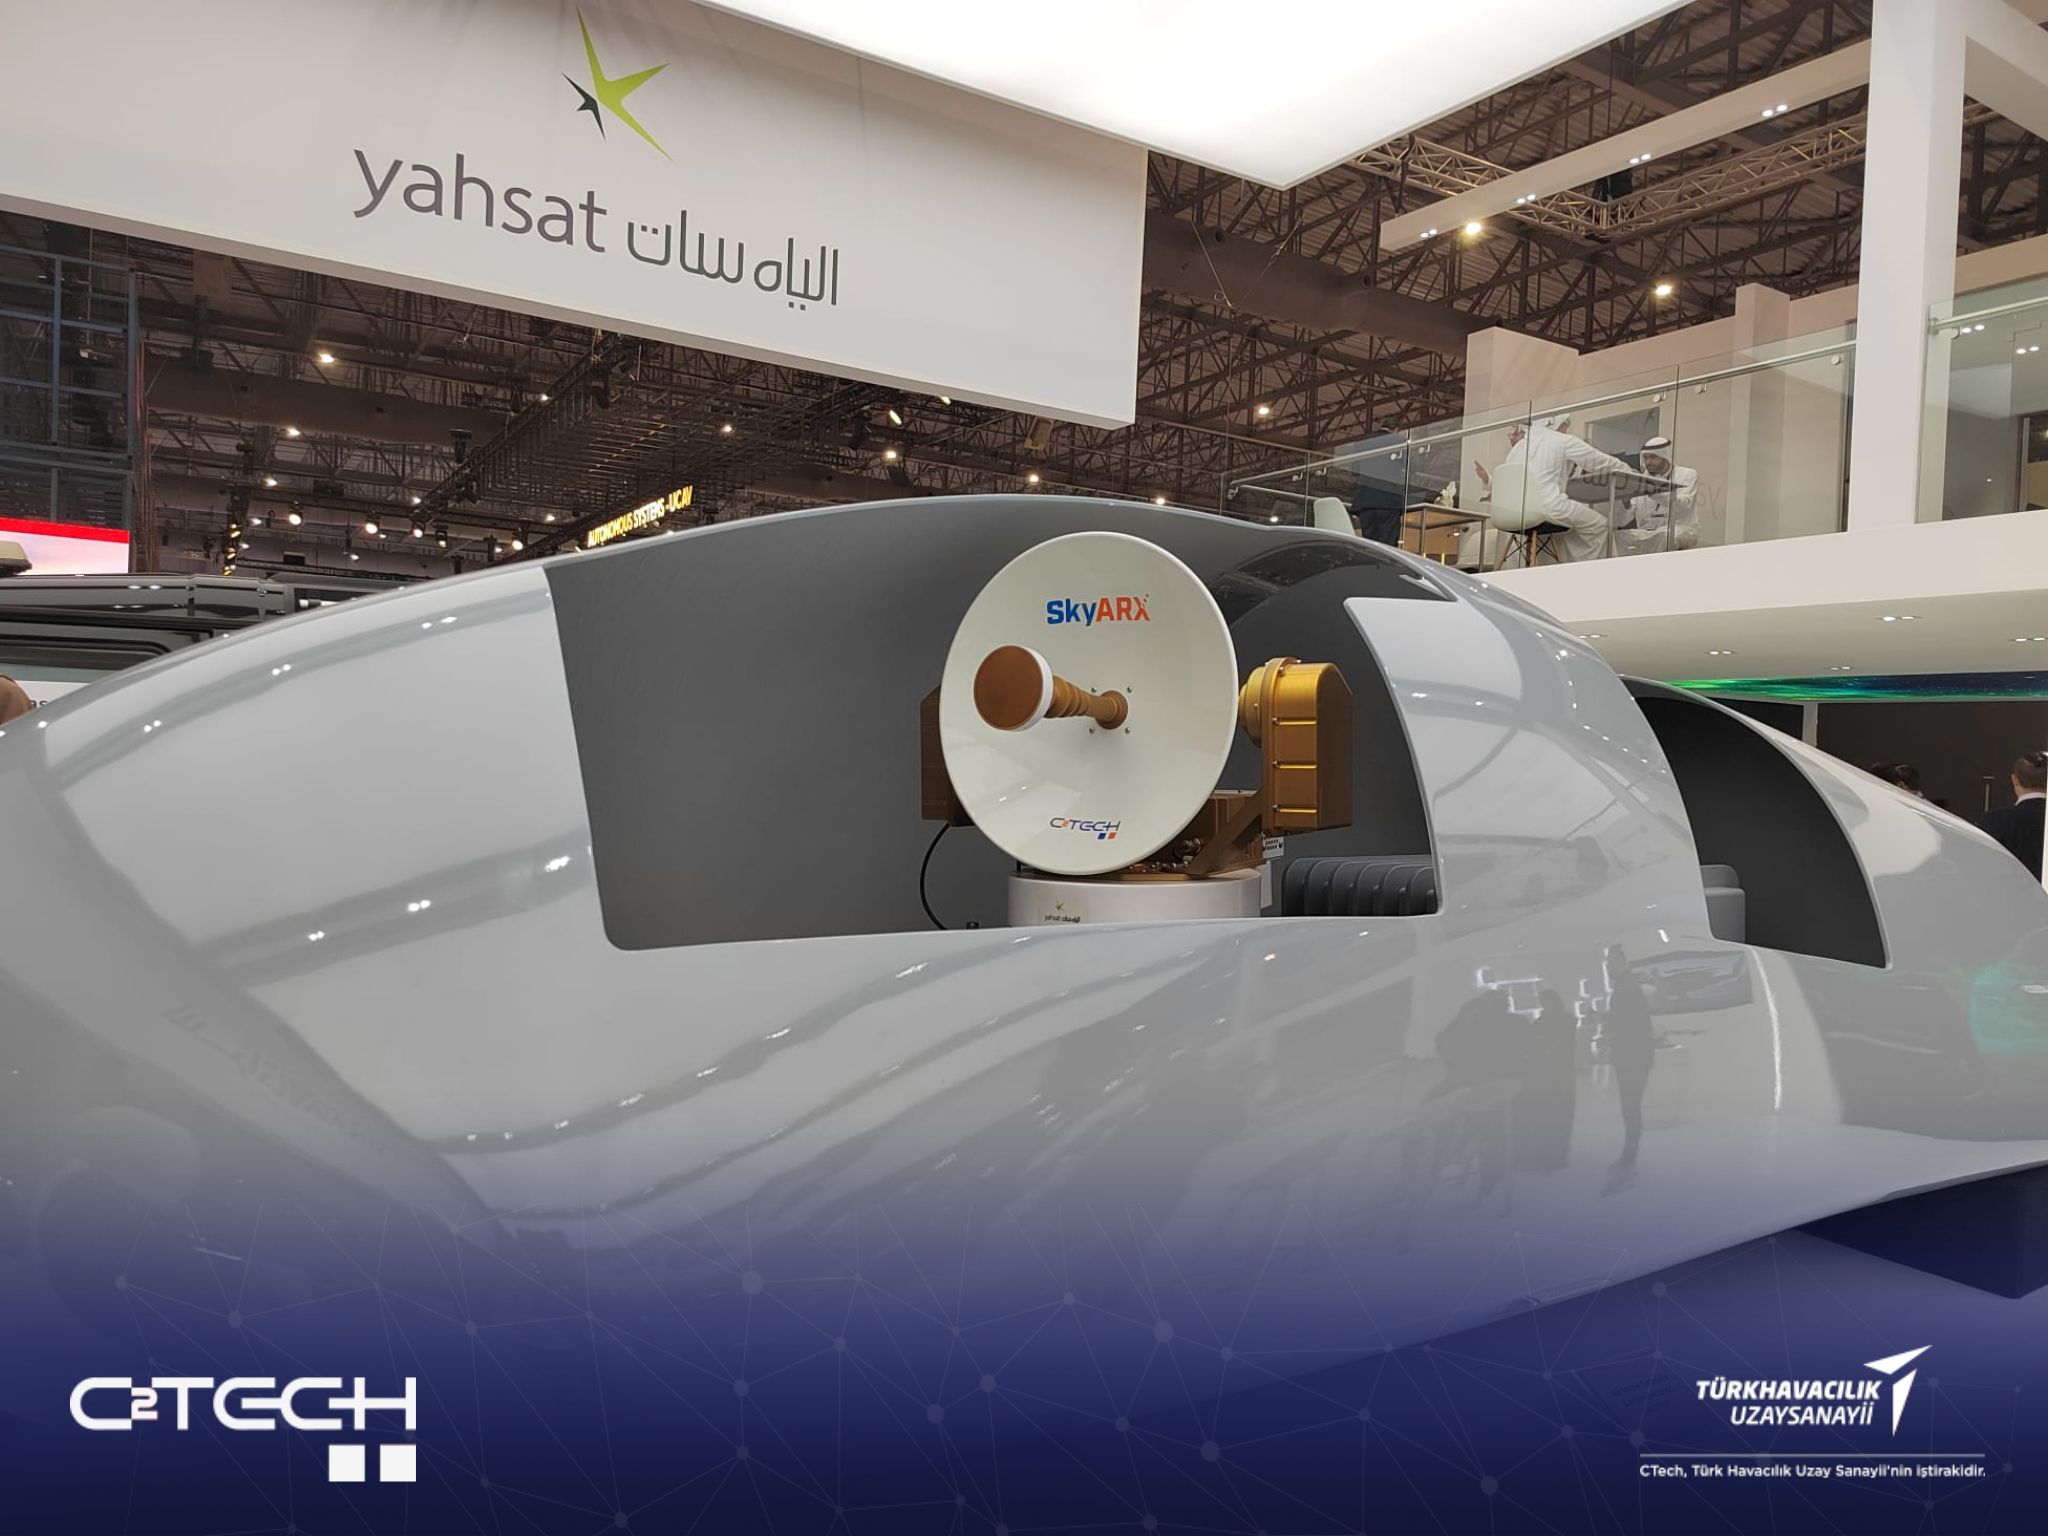 CTech | CTech Information Technologies Participated in the International Aviation and Space Fair Dubai Airshow held in the United Arab Emirates between 13 - 17 November.